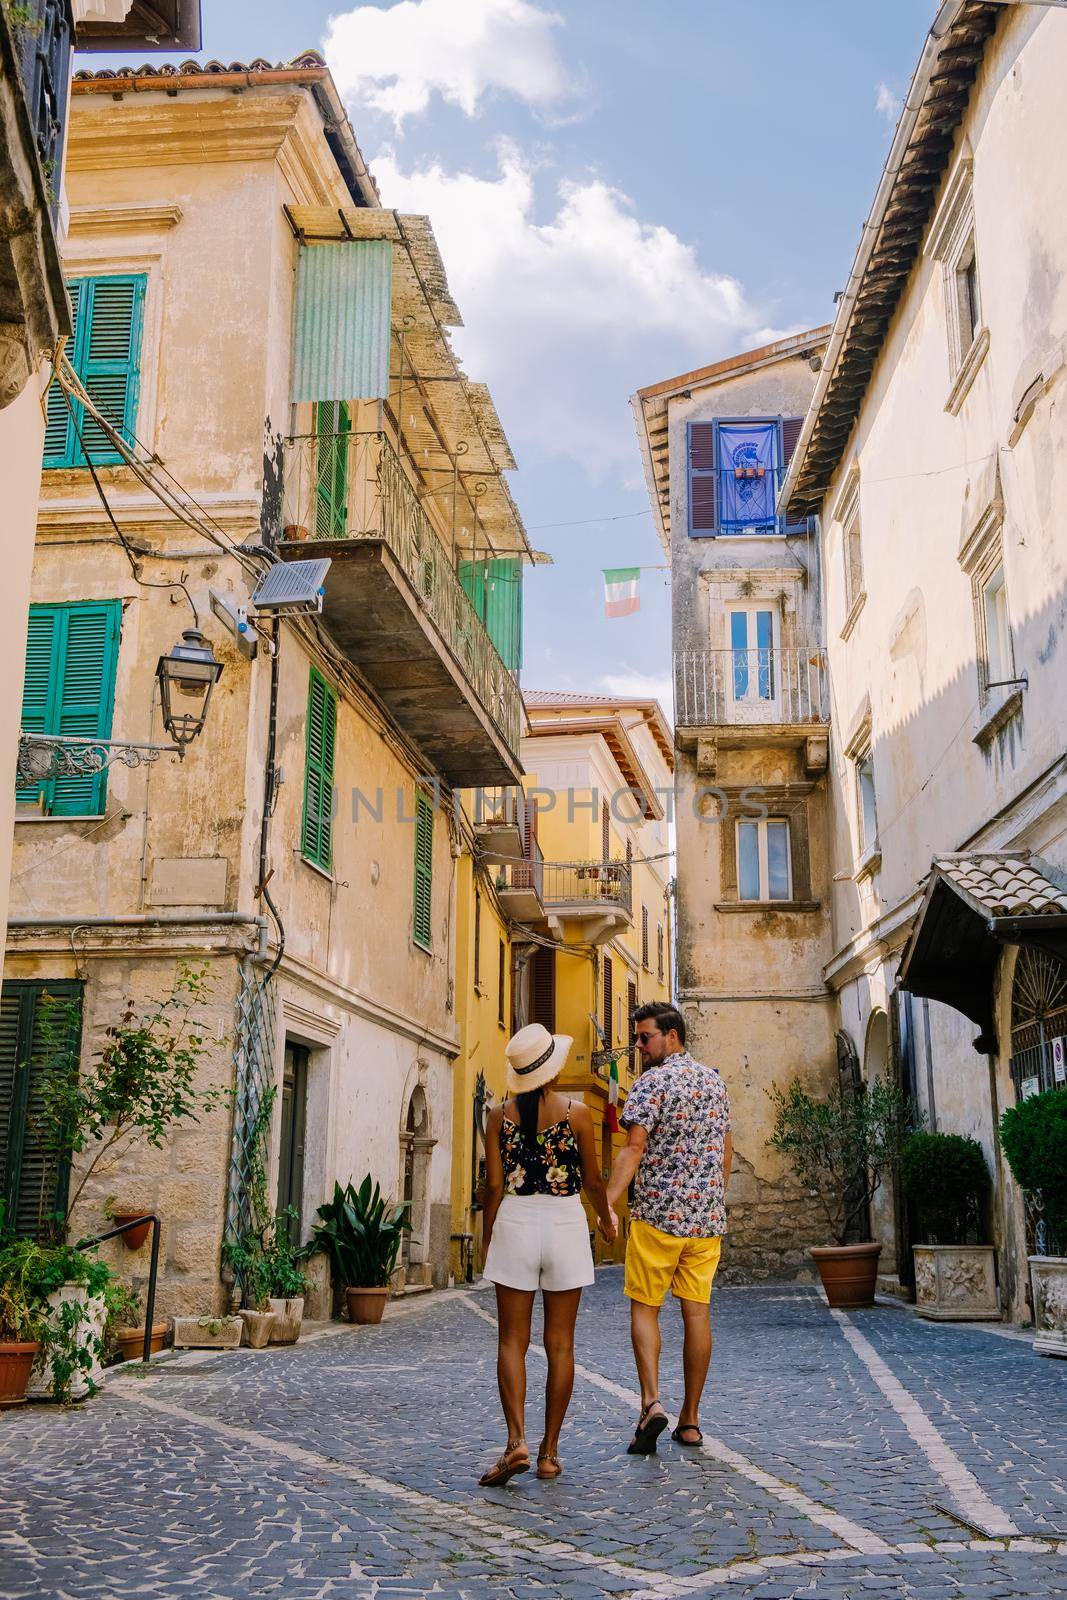 Overview of Fiuggi in Italy, Scenic sight in Fiuggi, Province of Frosinone, Lazio, central Italy. Europe, a couple walking on the colorful streets of Fiuggi. 